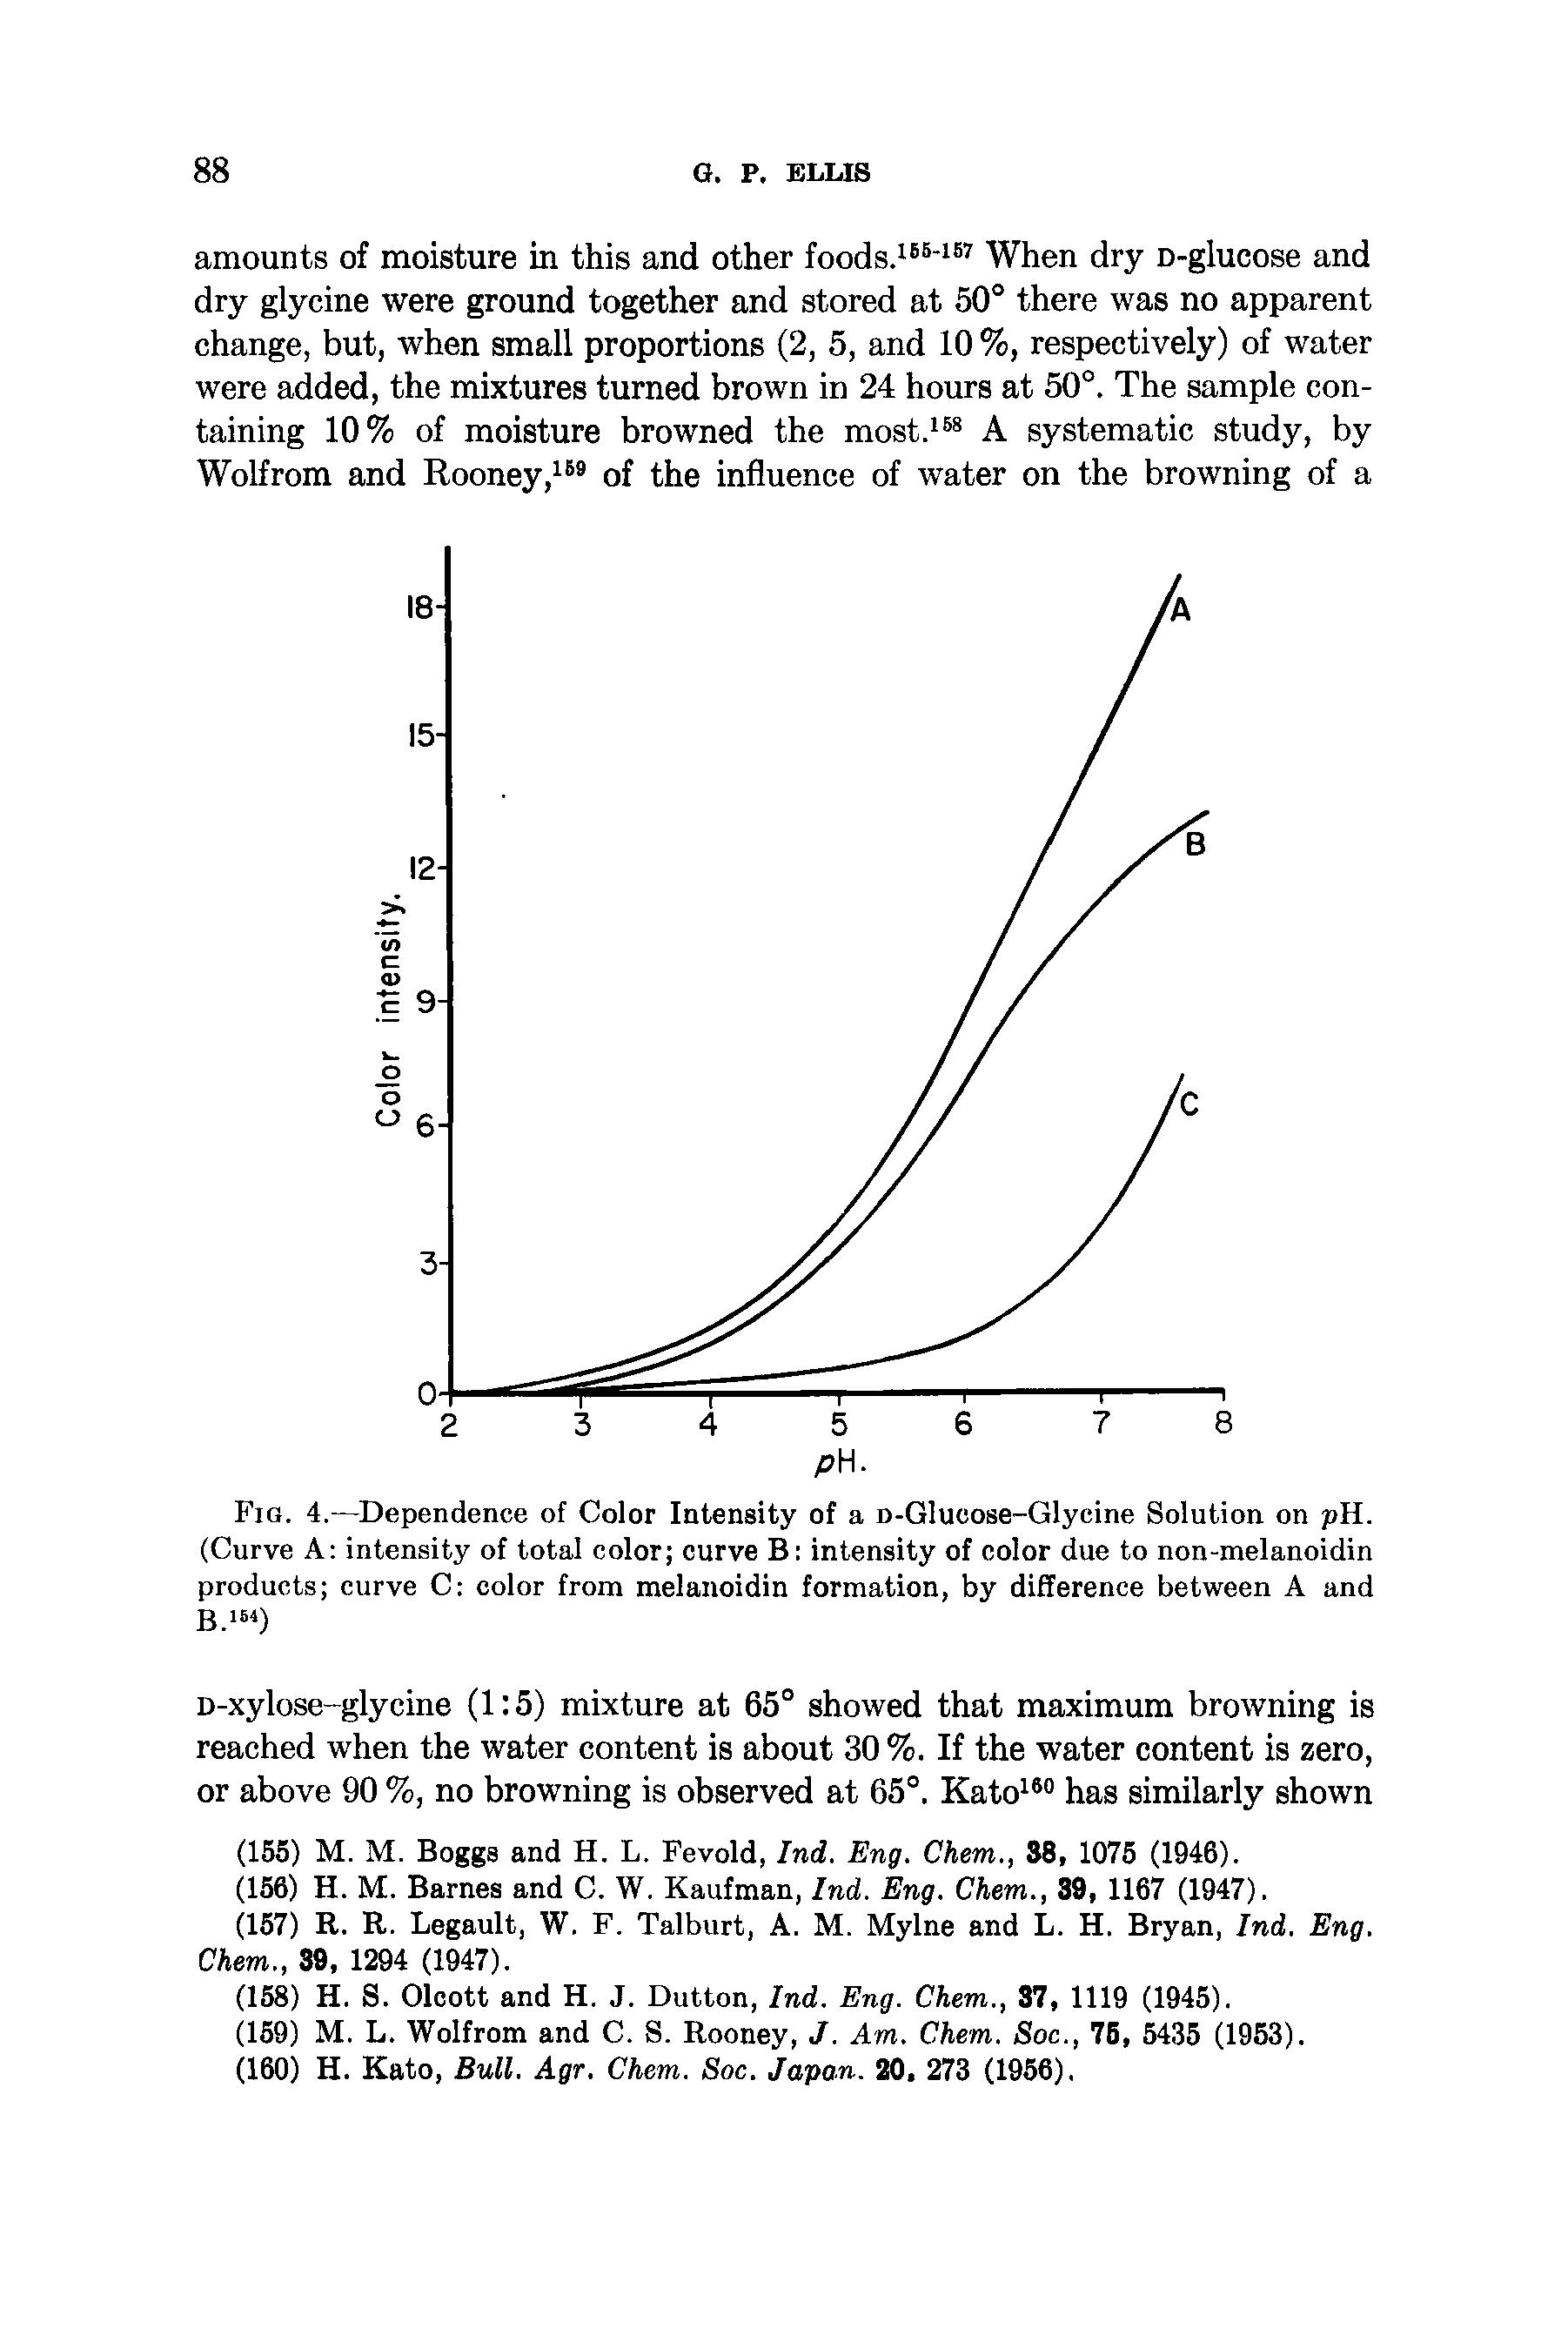 Fig. 4.—Dependence of Color Intensity of a D-Glucose-Glycine Solution on pH. (Curve A intensity of total color curve B intensity of color due to non-melanoidin products curve C color from melanoidin formation, by difference between A and B.164)...